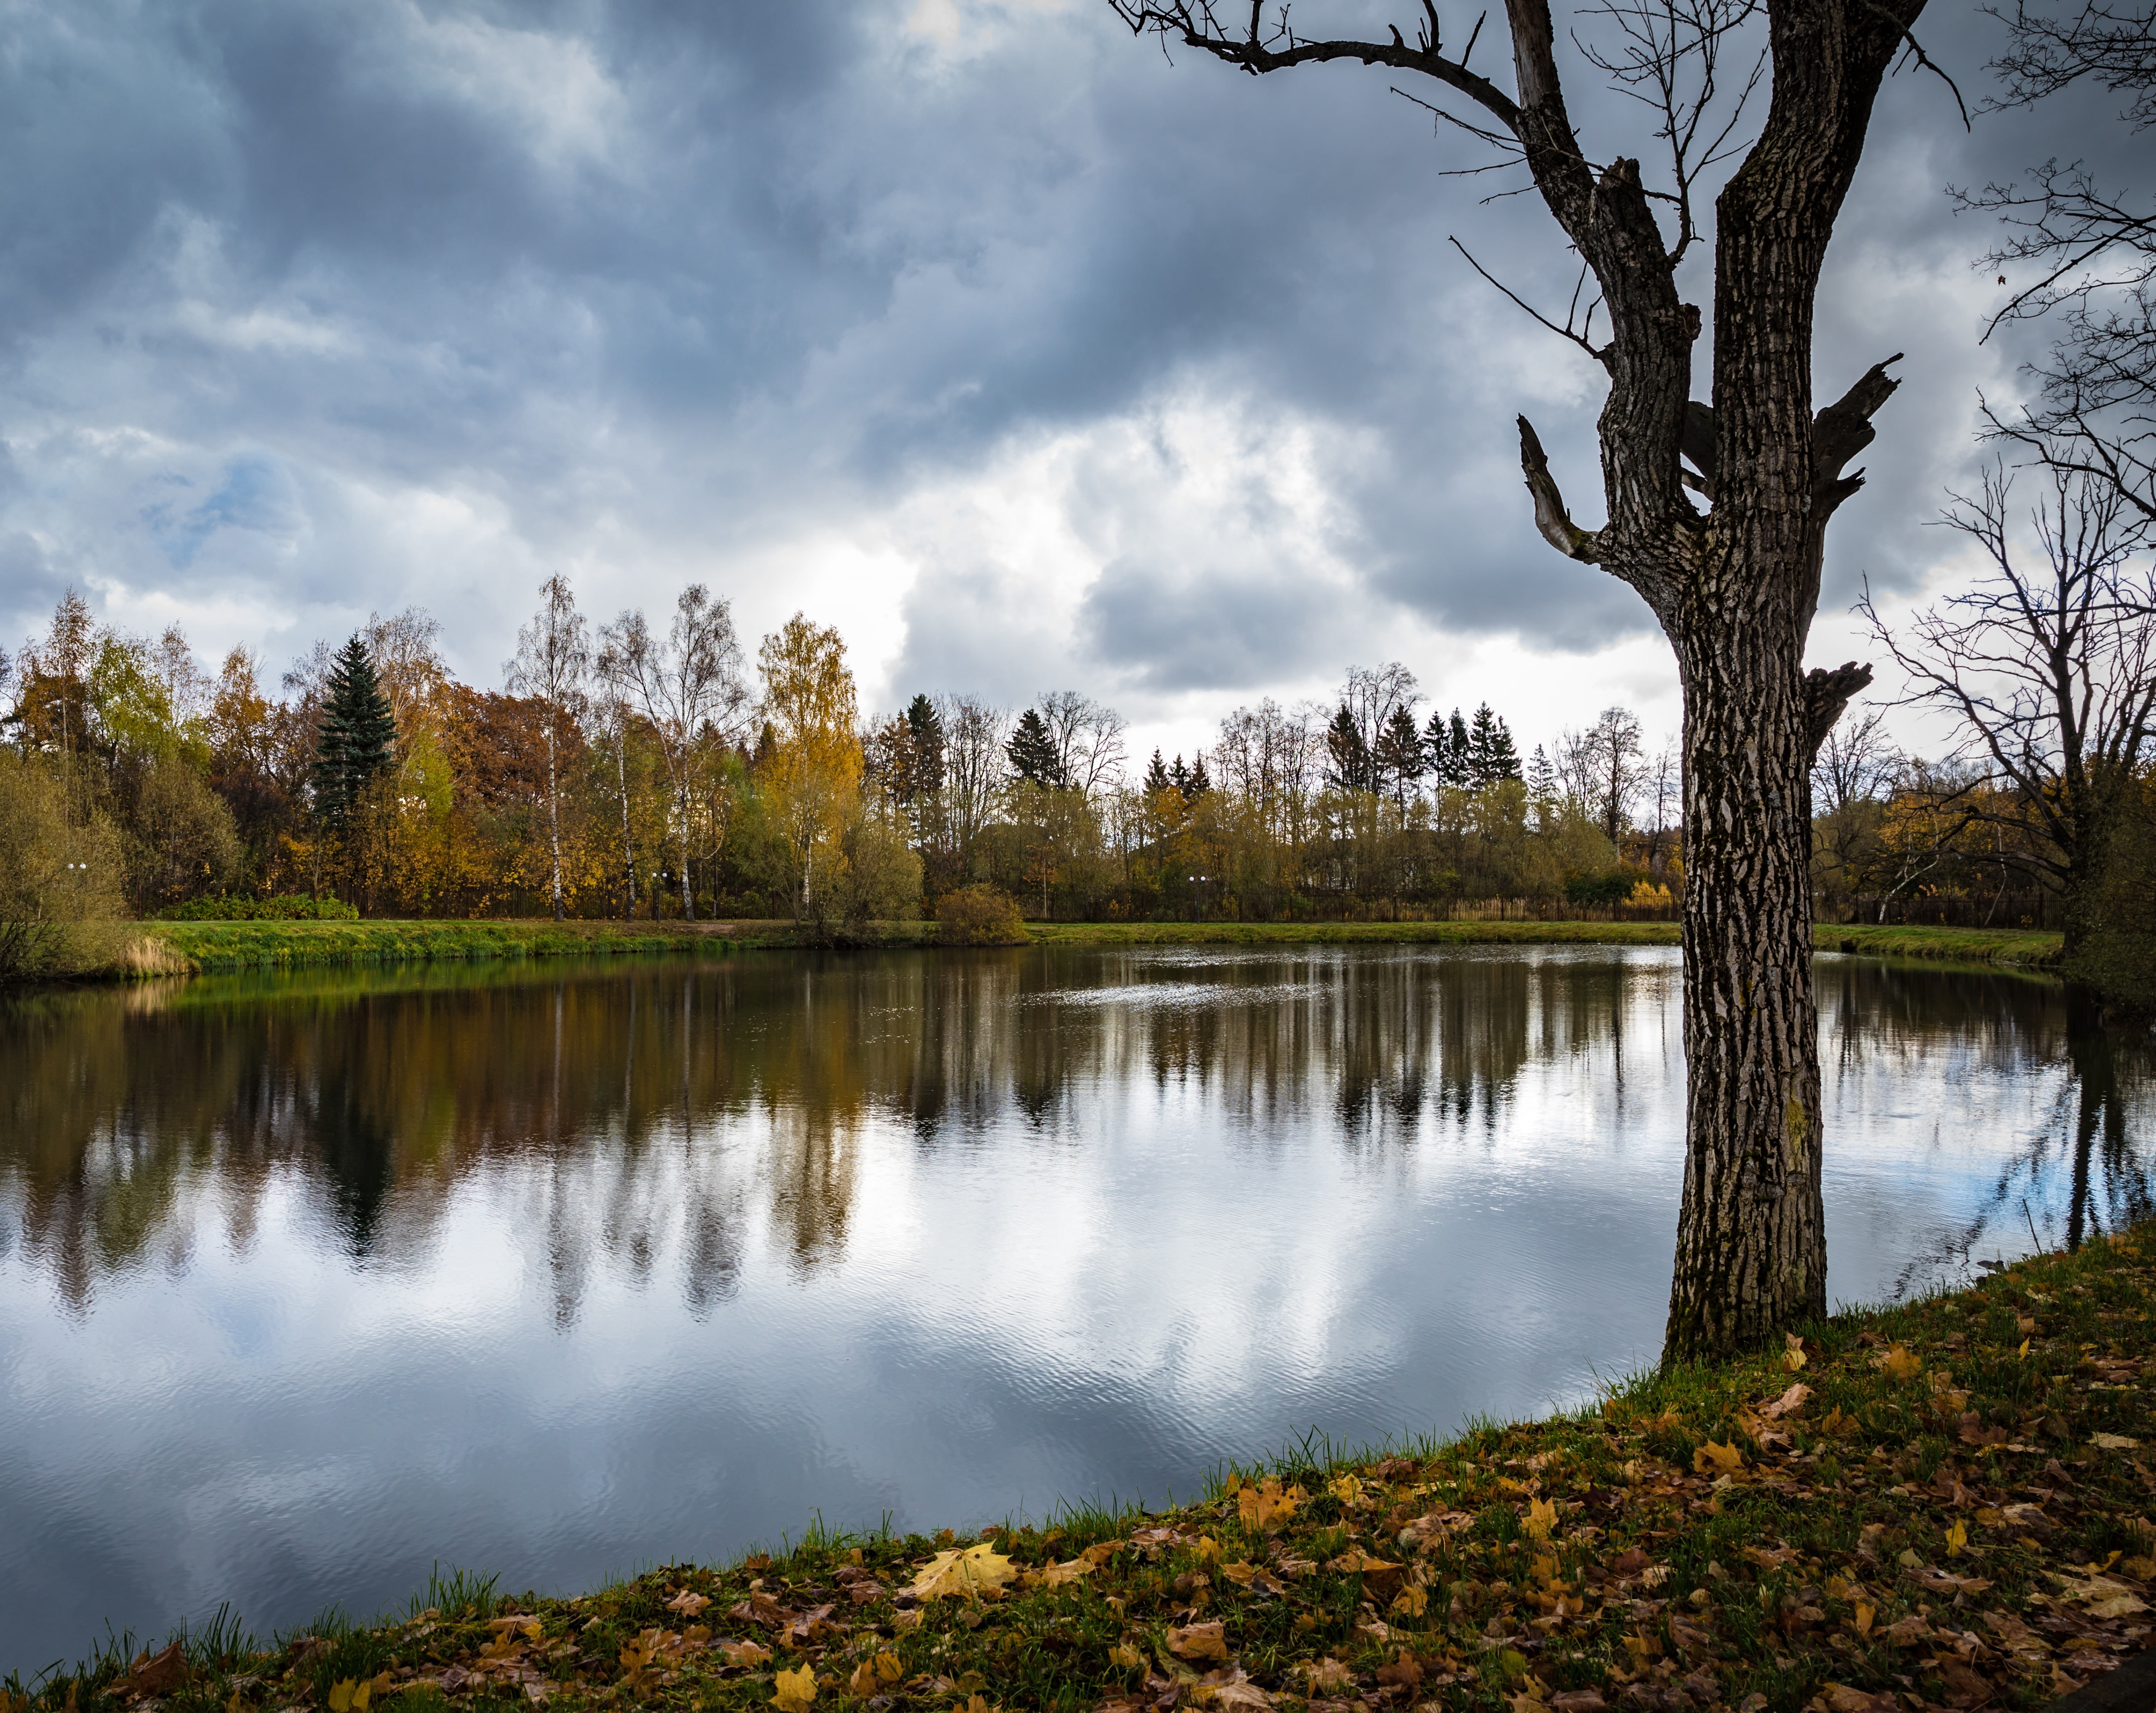 Lake, Nature, Lakes, Autumn, Cloudy, Fall, stormclouds, tree